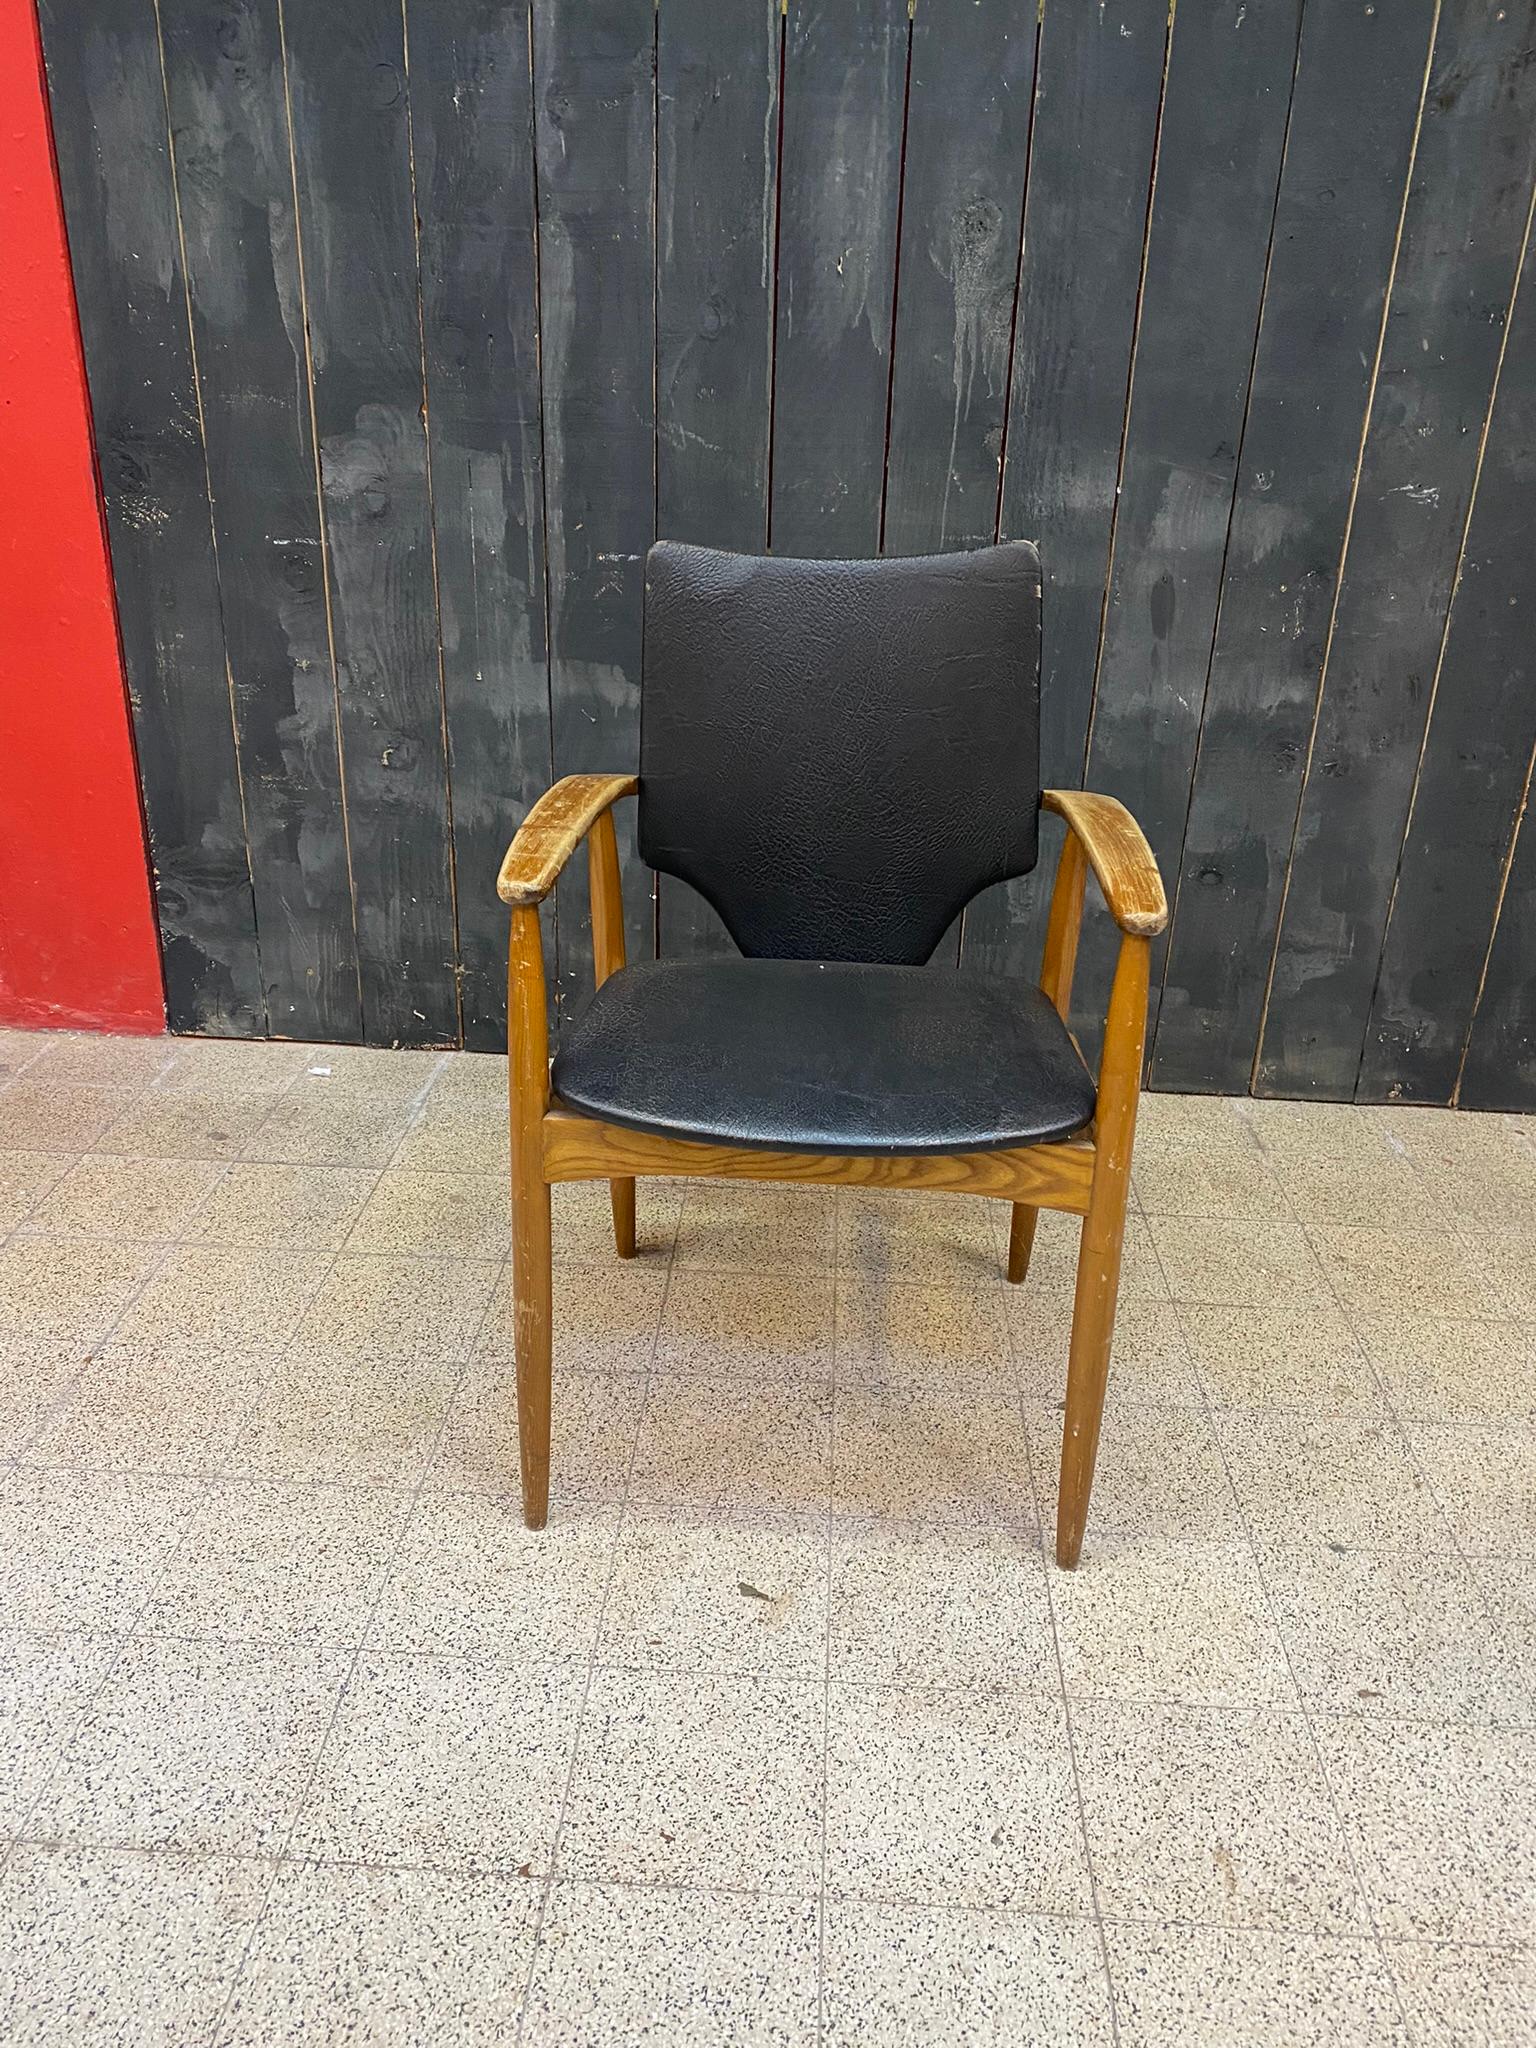 French reconstruction armchair in Scandinavian style, circa 1960
patina and coating to redo.